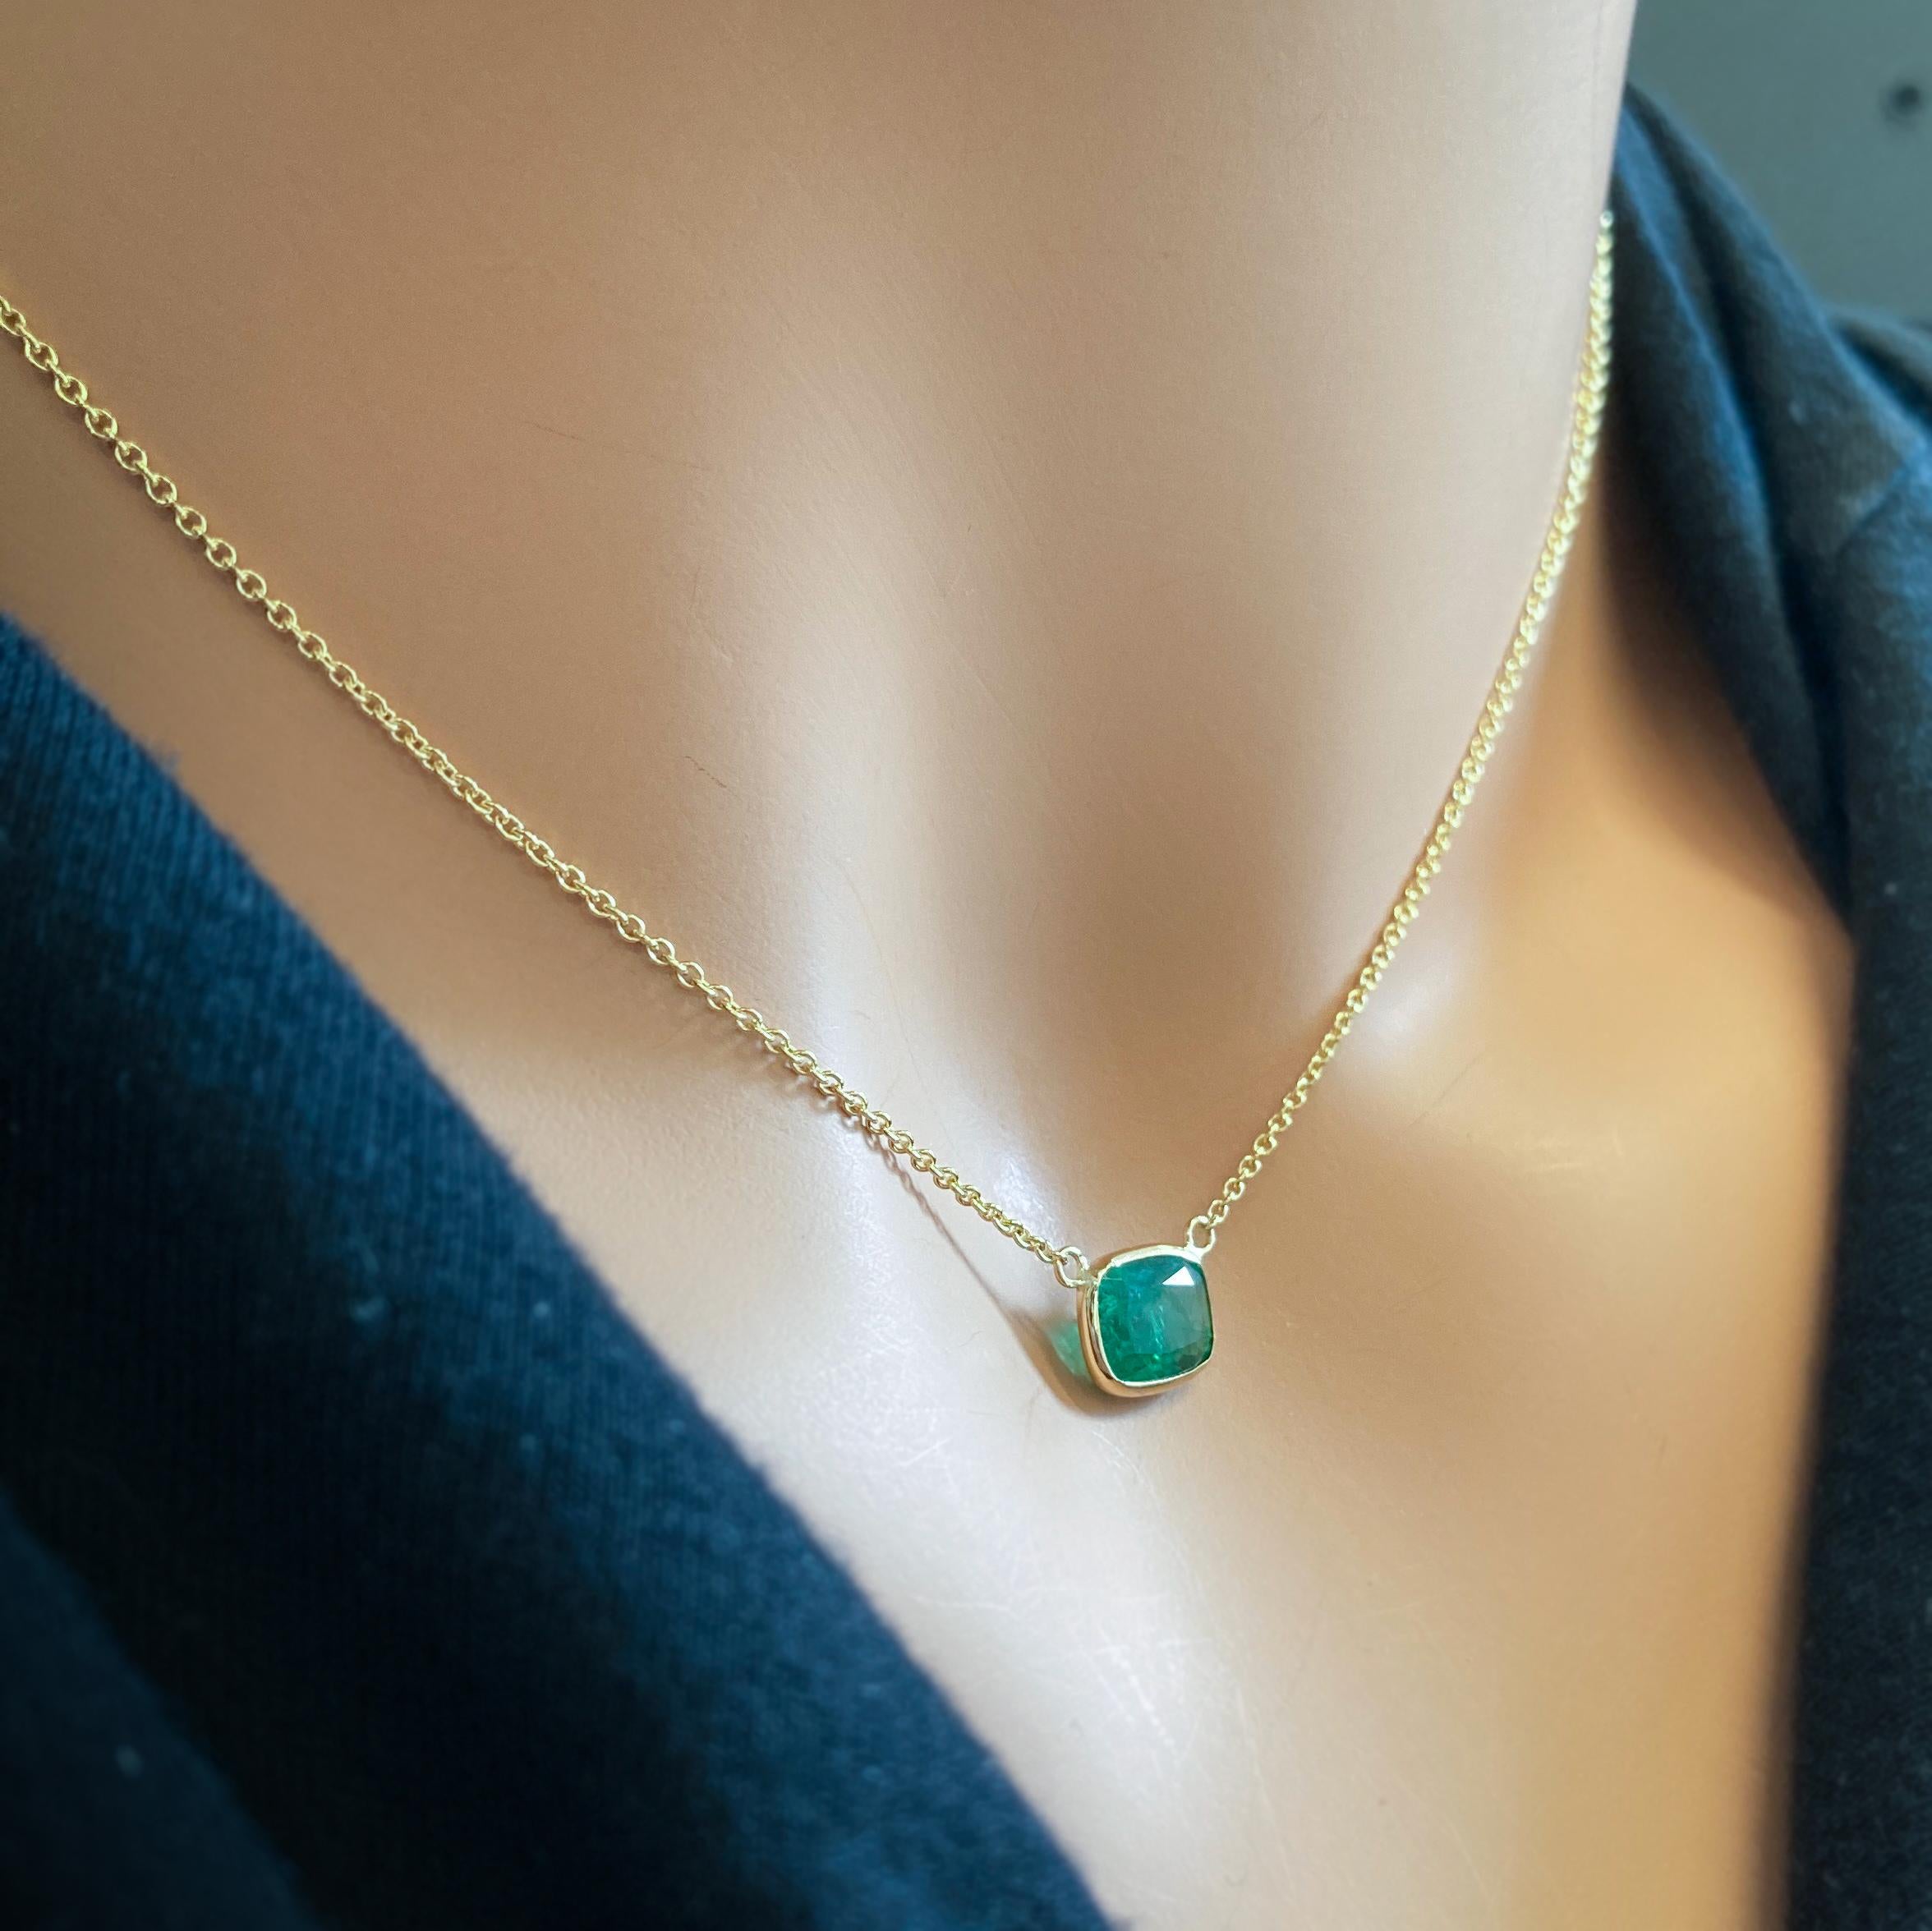 Contemporary 1.96 Carat Green Emerald Cushion Cut Fashion Necklaces In 14K Yellow Gold For Sale